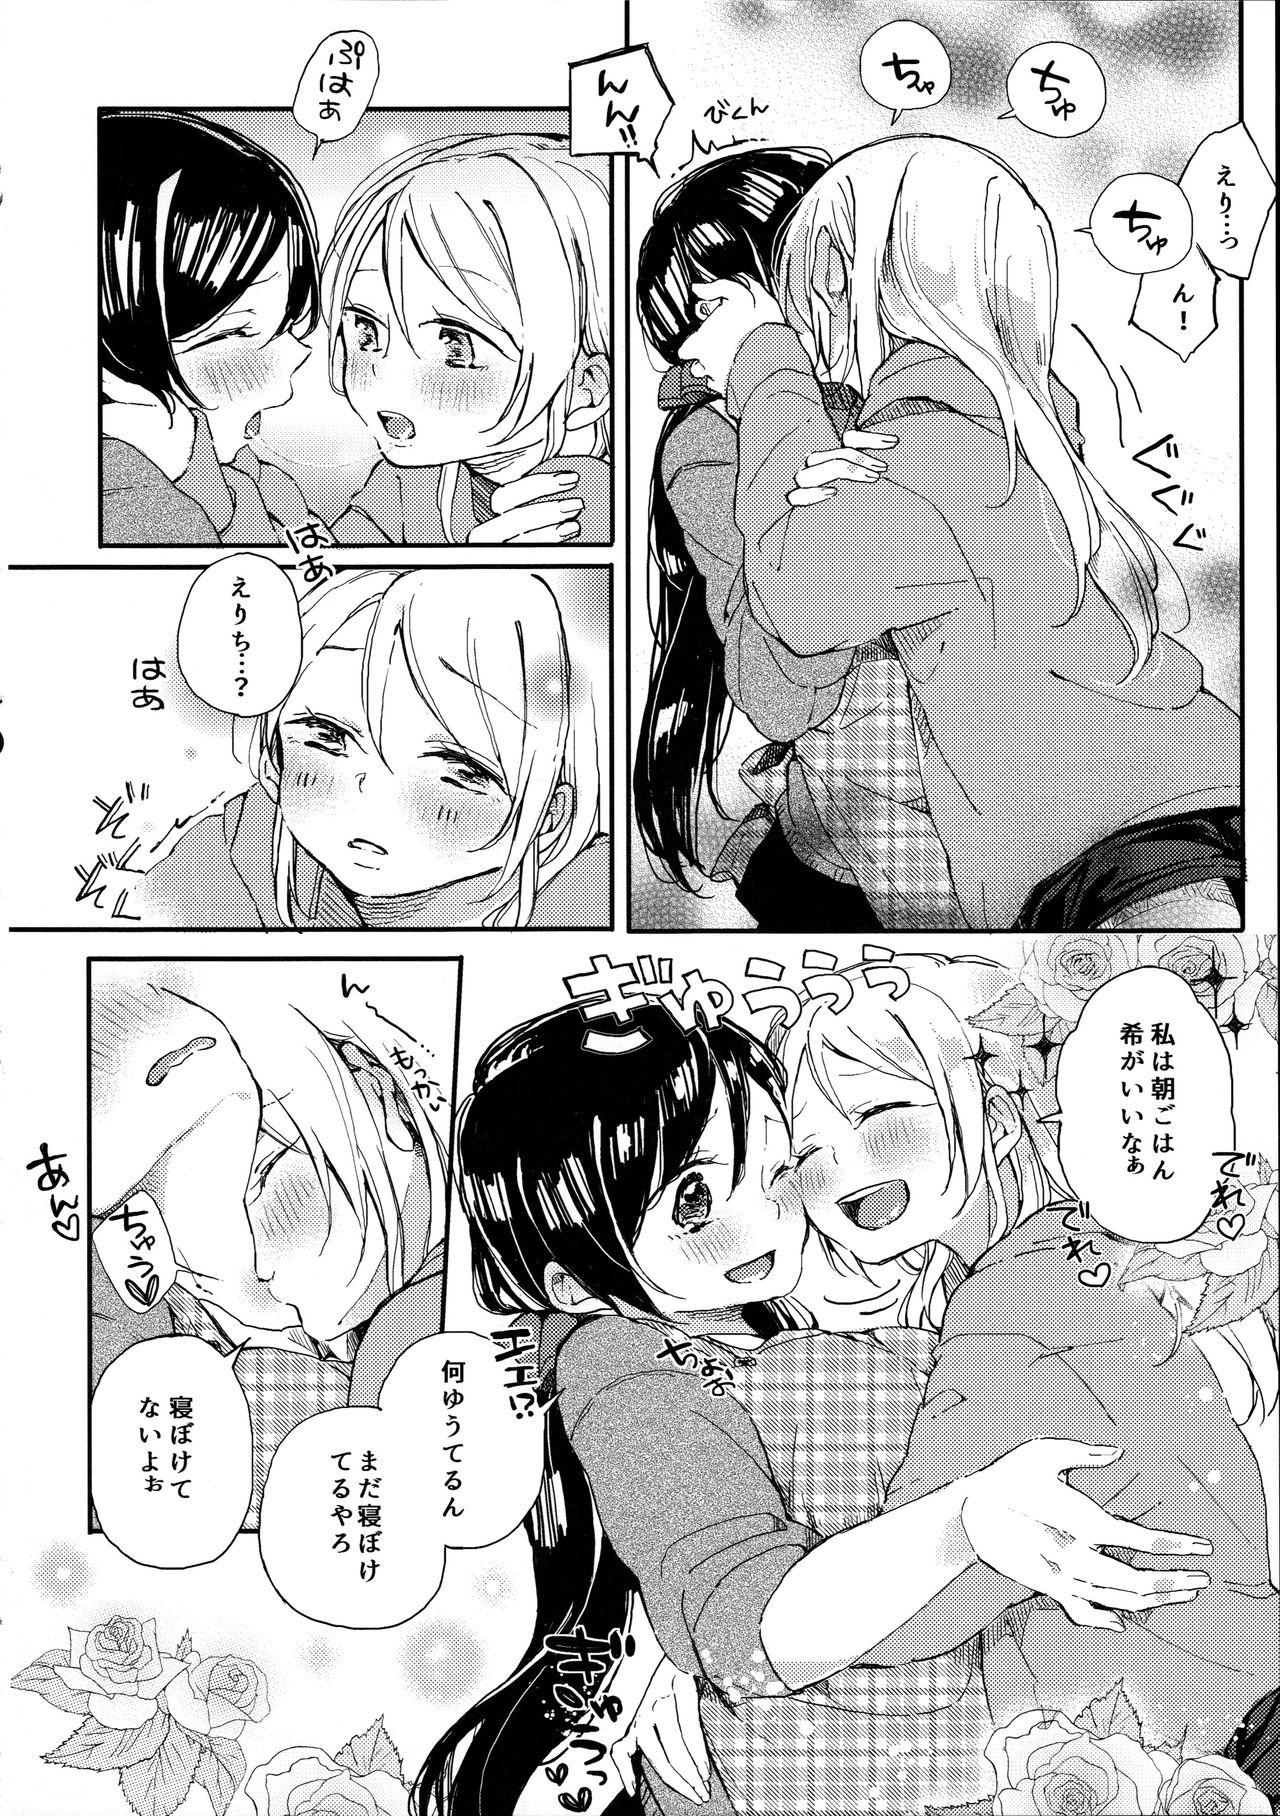 Gays Tachiagare Shokun - Love live Pussy Licking - Page 8